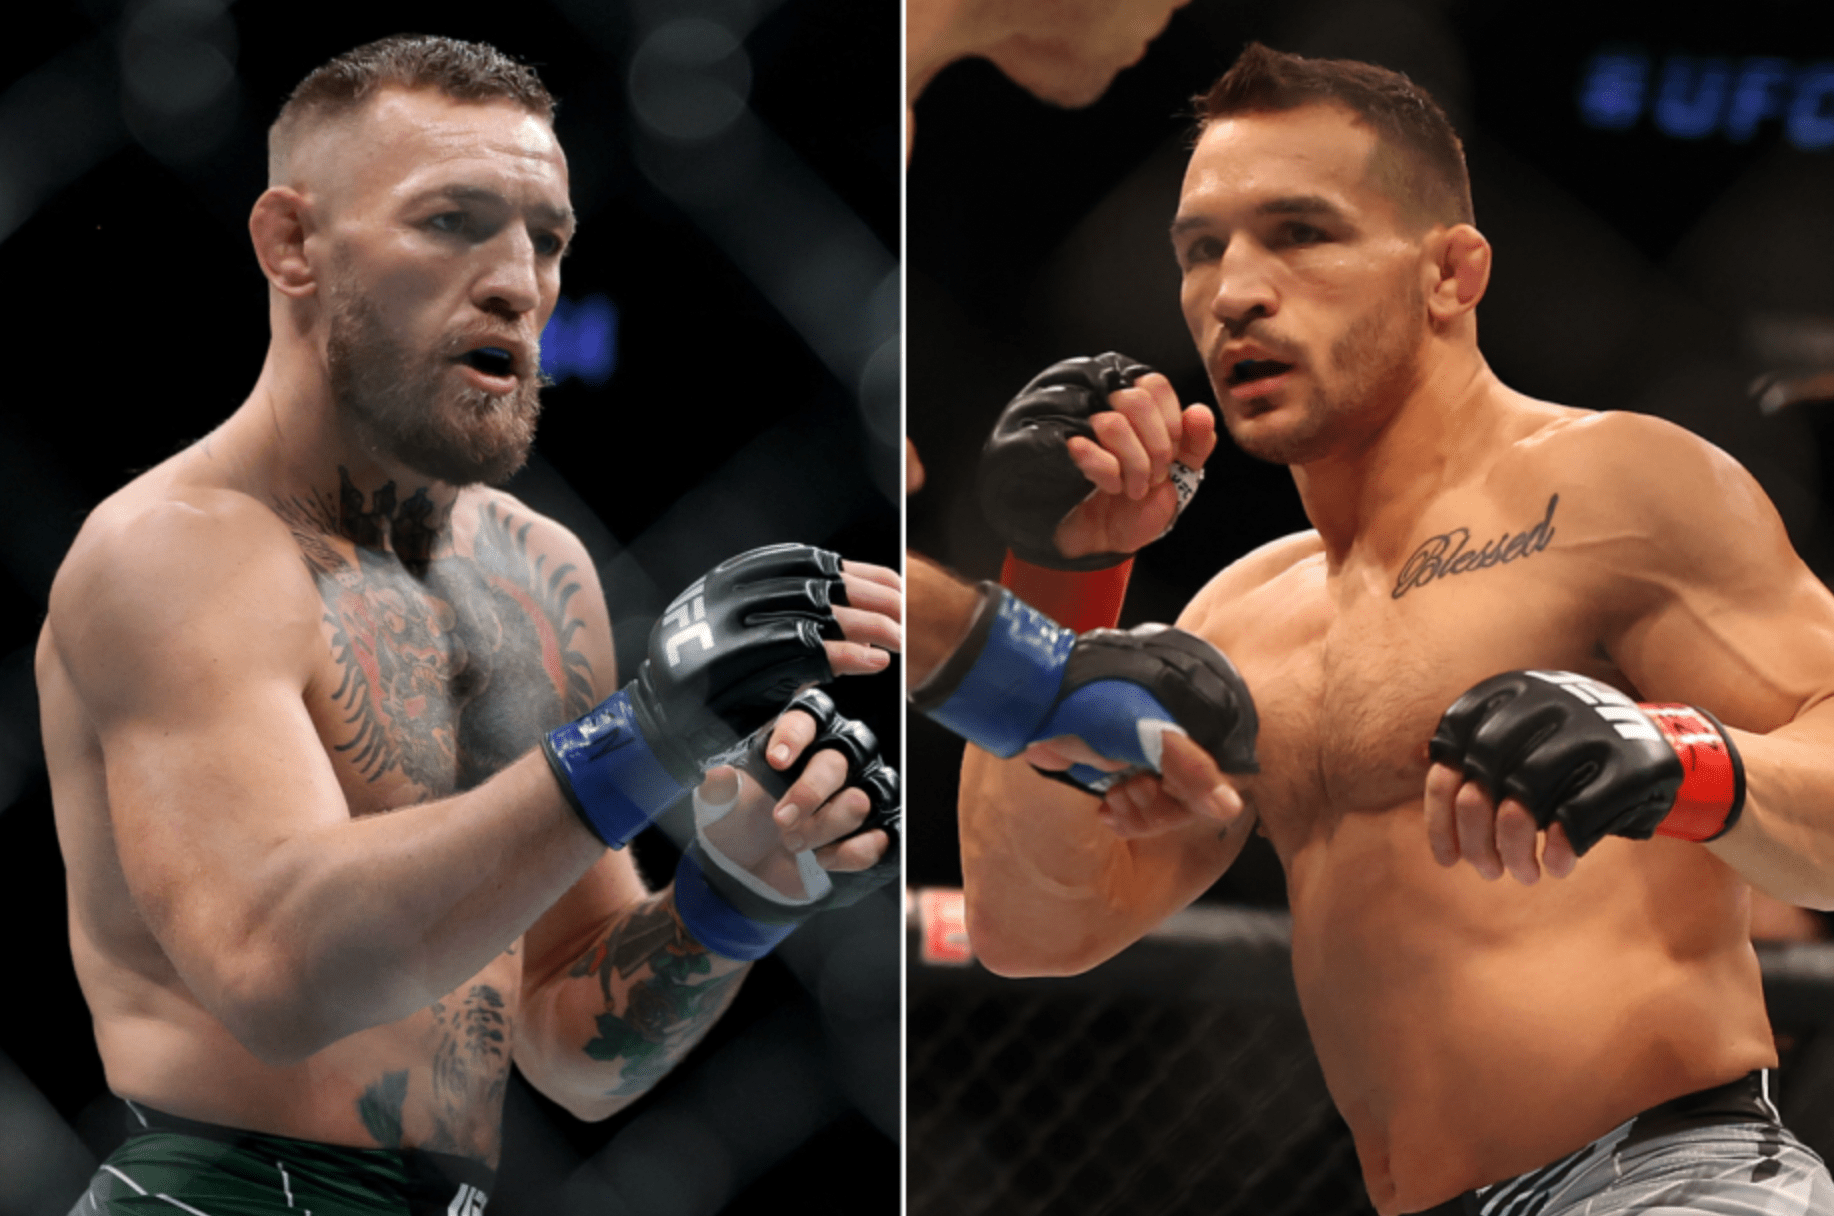 Michael Chandler vs Conor McGregor The Ultimate Test of Strength!